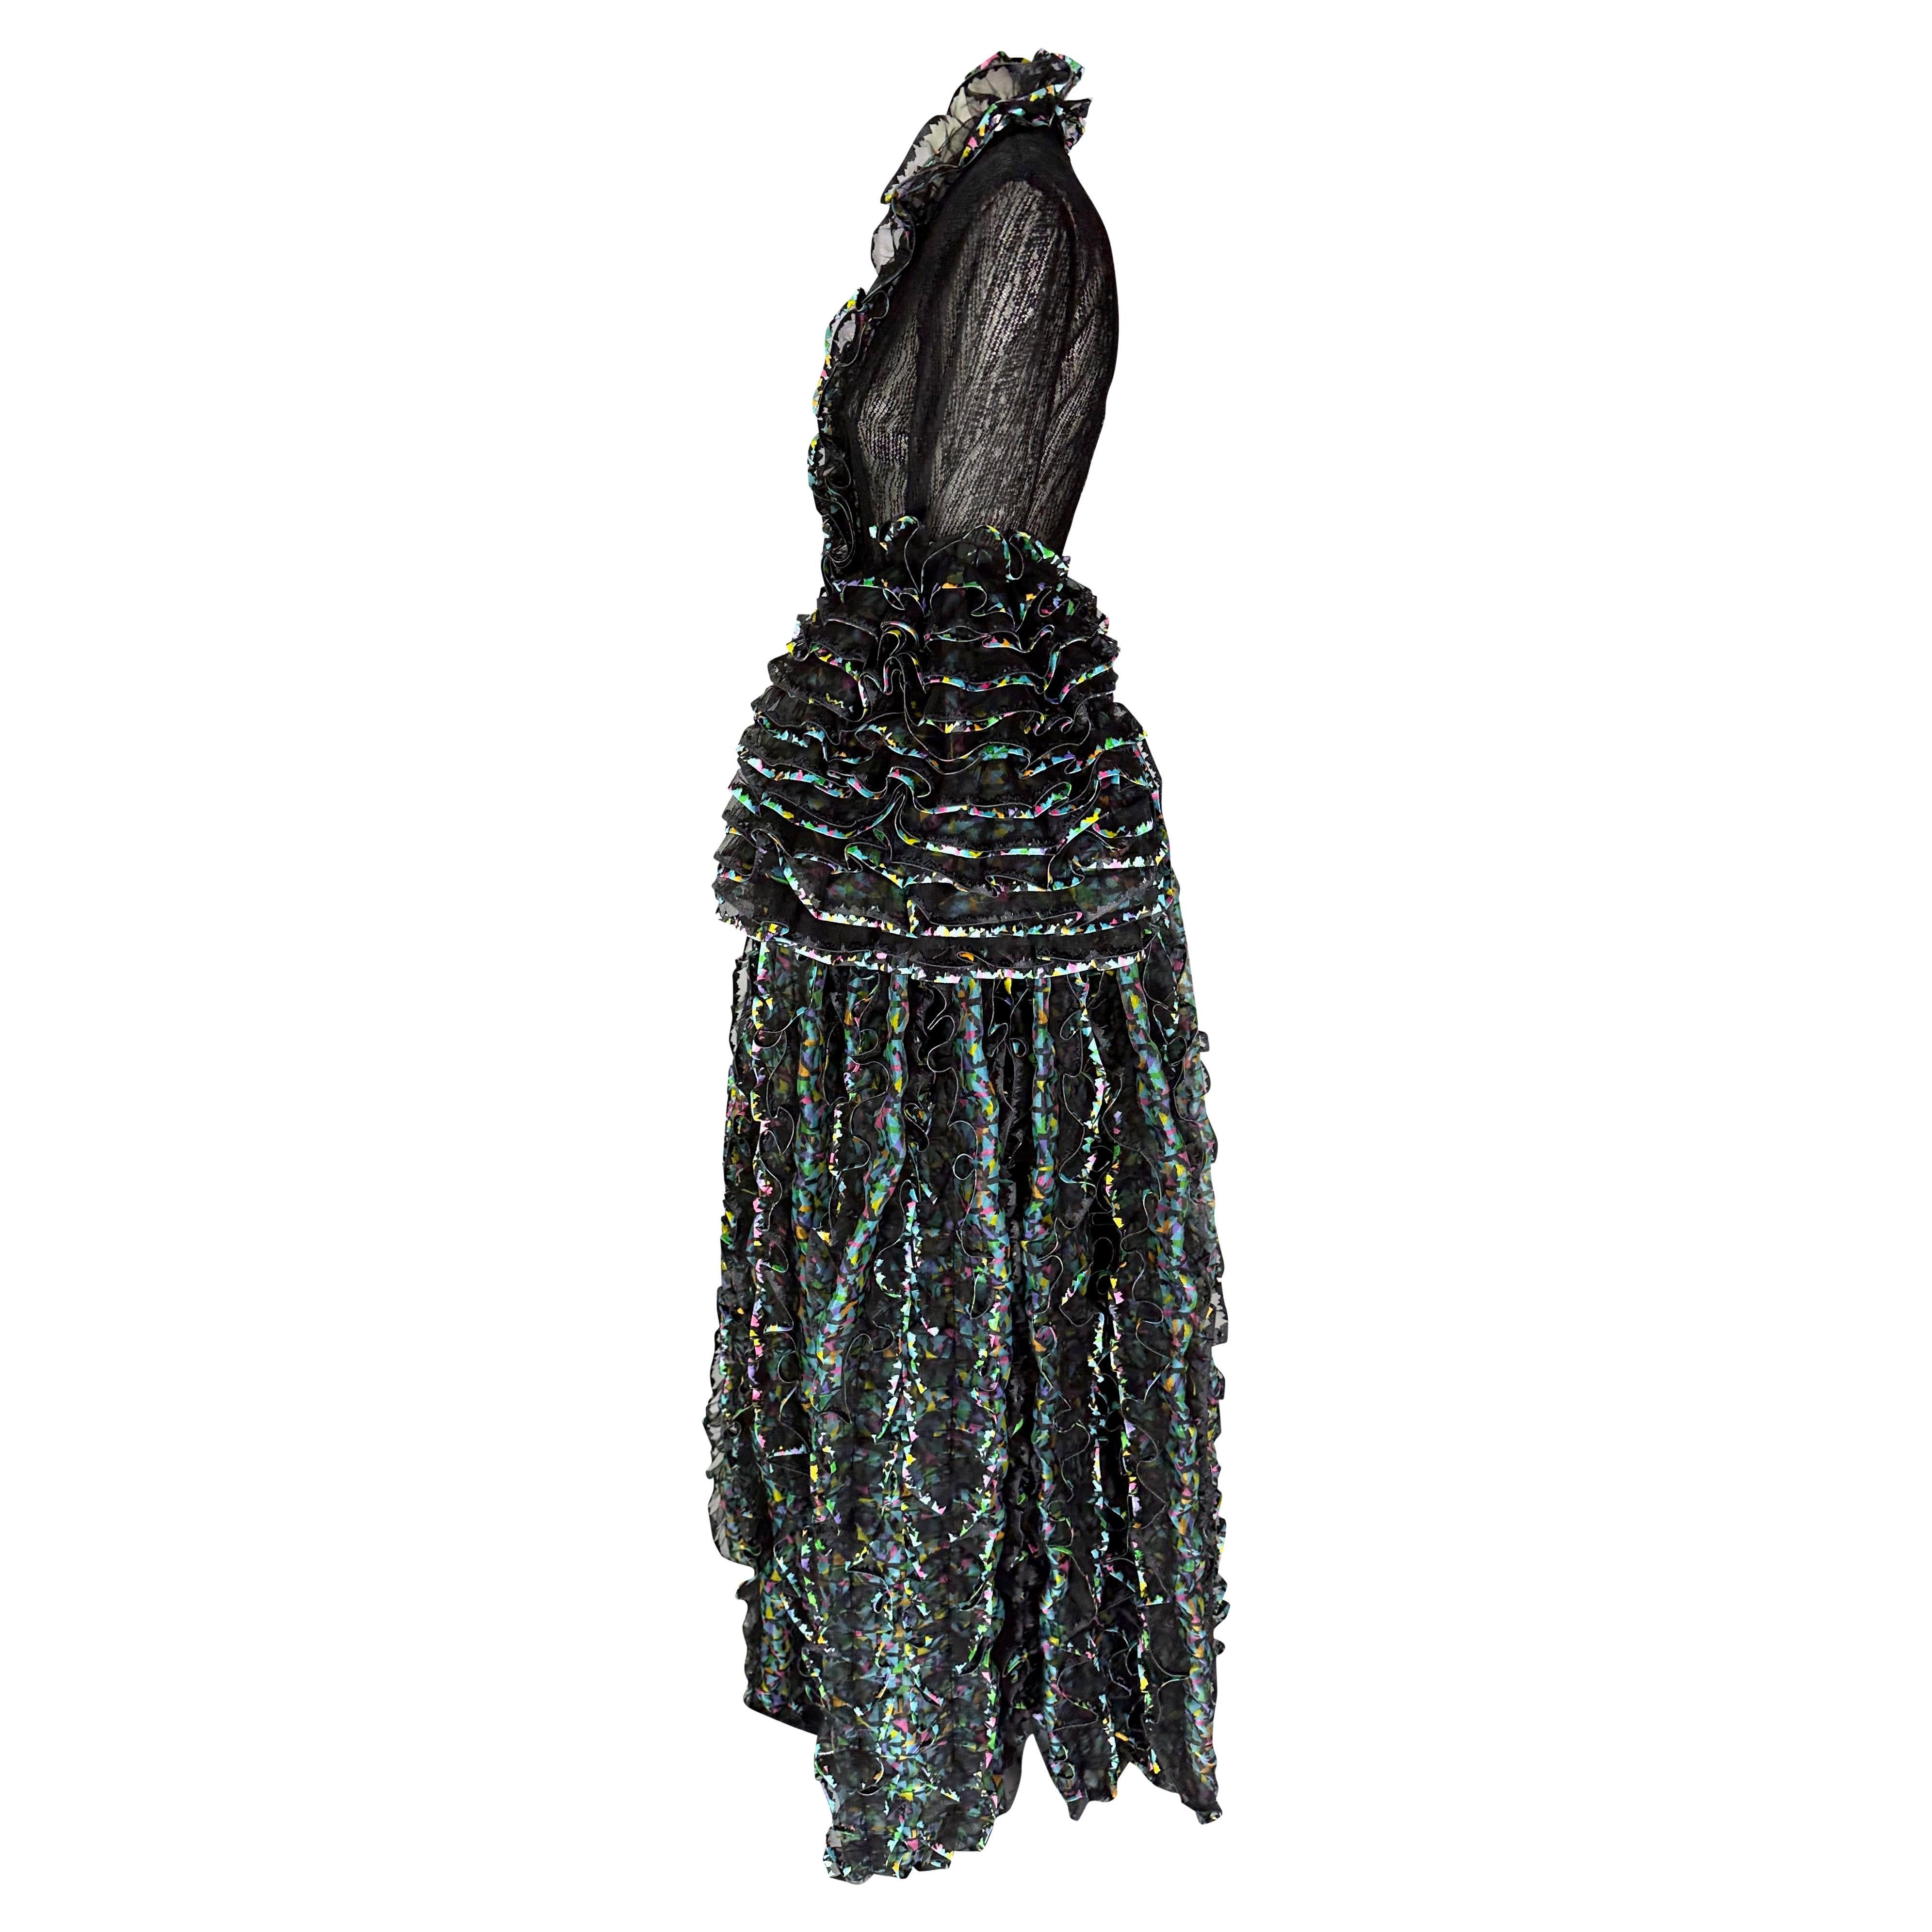 S/S 1987 Paco Rabanne Haute Couture Runway Sheer Embroidered Ruffle Gown For Sale 1